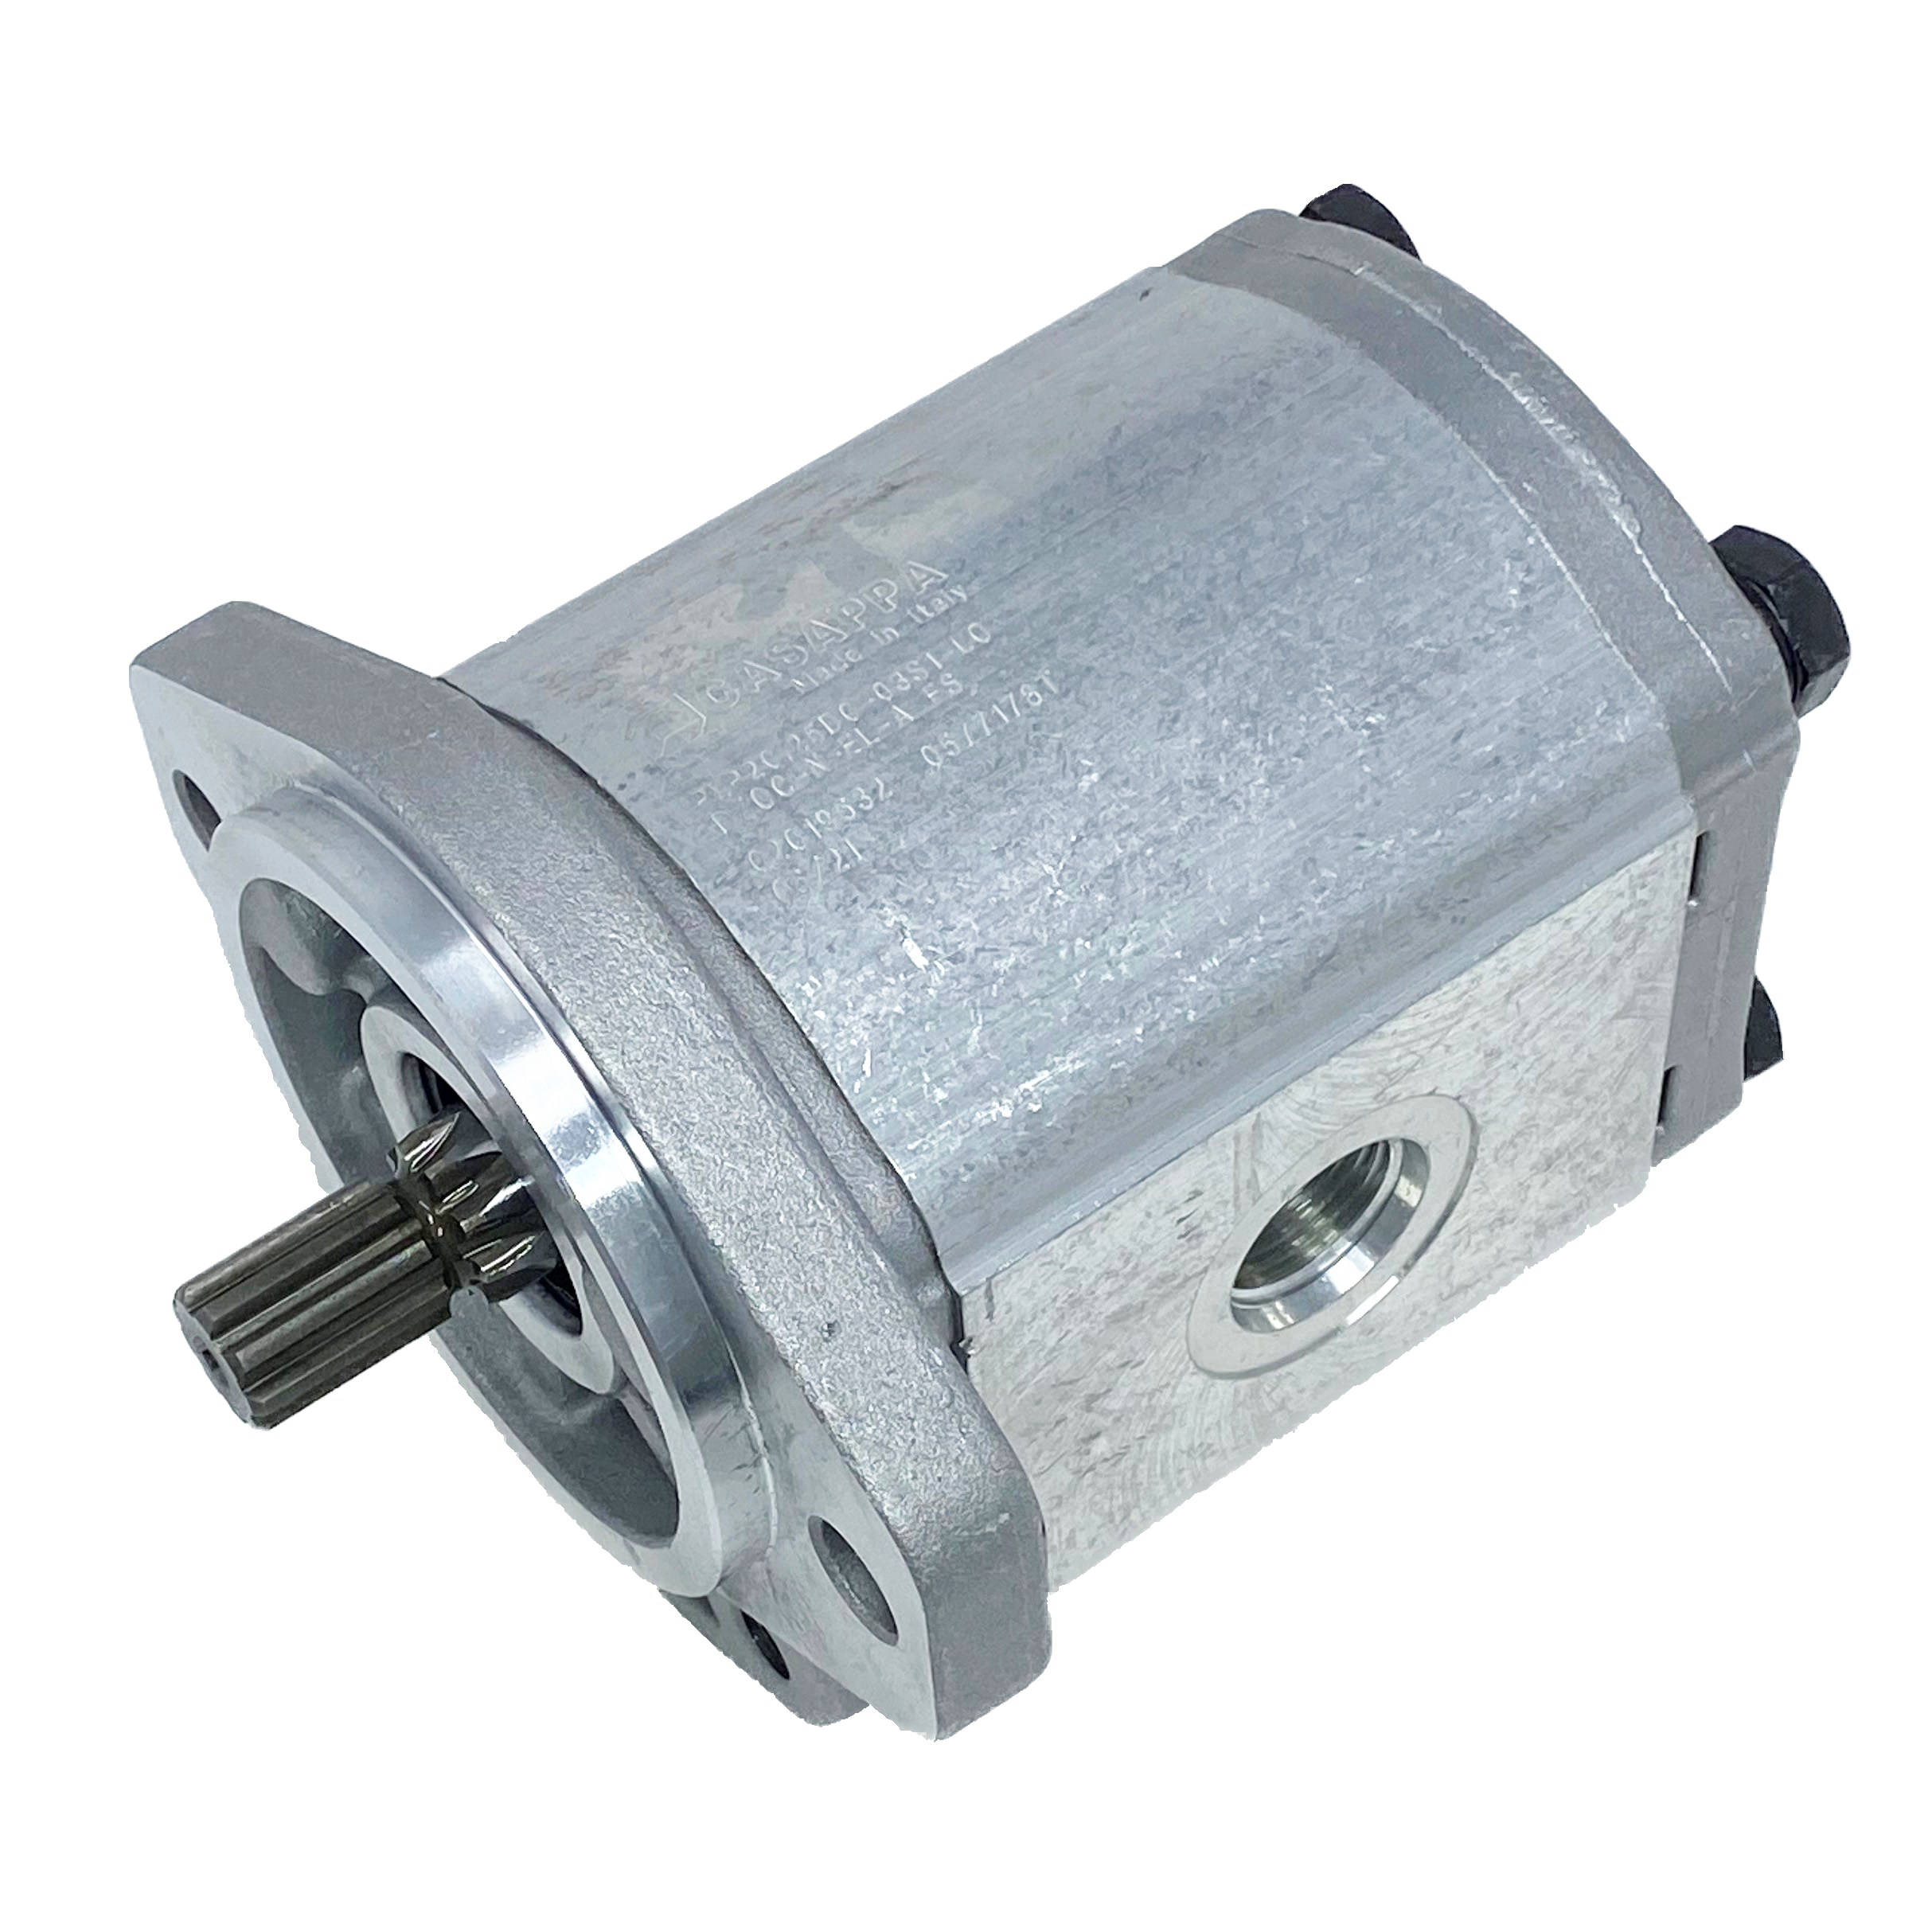 PHP20.31,5S0-07S9-LOG/OC-N-EL : Casappa Polaris Gear Pump, 33.03cc, 2900psi Rated, 2500RPM, CCW, 11T 16/32dp Shaft, SAE A 2-Bolt Flange, 1.25" #20 SAE Inlet, 0.625 (5/8") #10 SAE Outlet, Cast Iron Body, Aluminum Flange